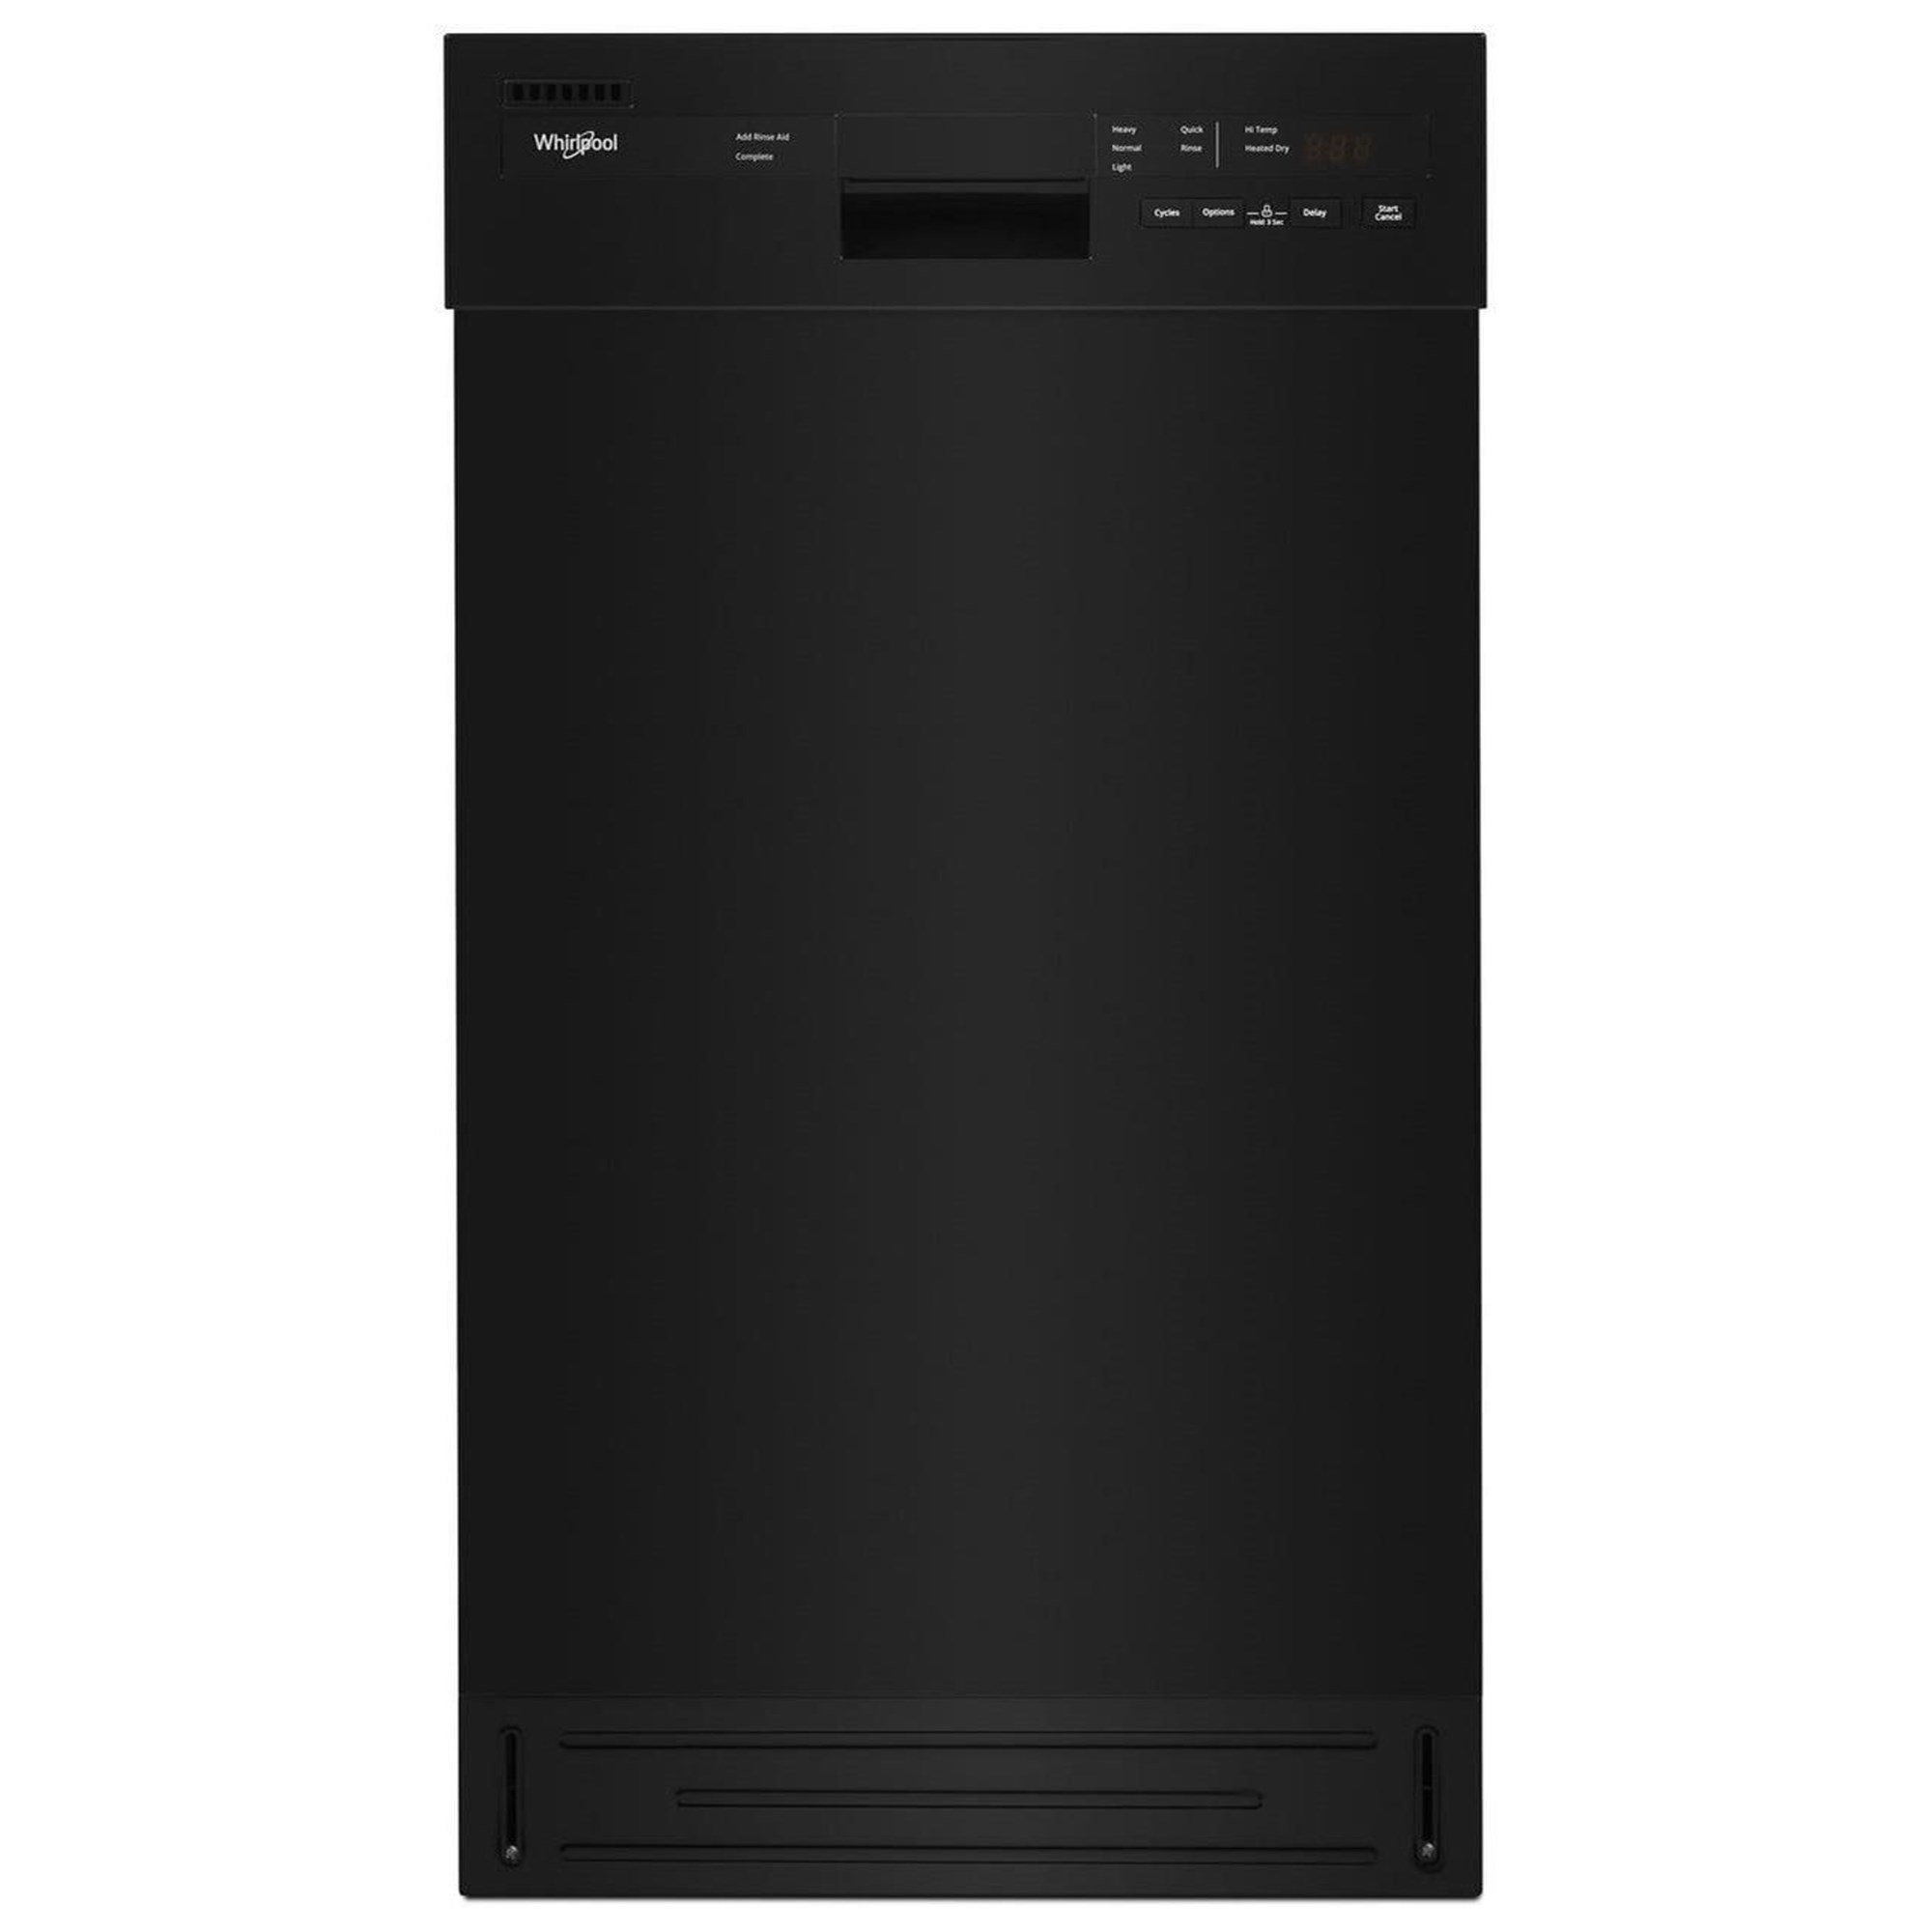 Whirlpool - WDF518SAHW - Small-Space Compact Dishwasher with